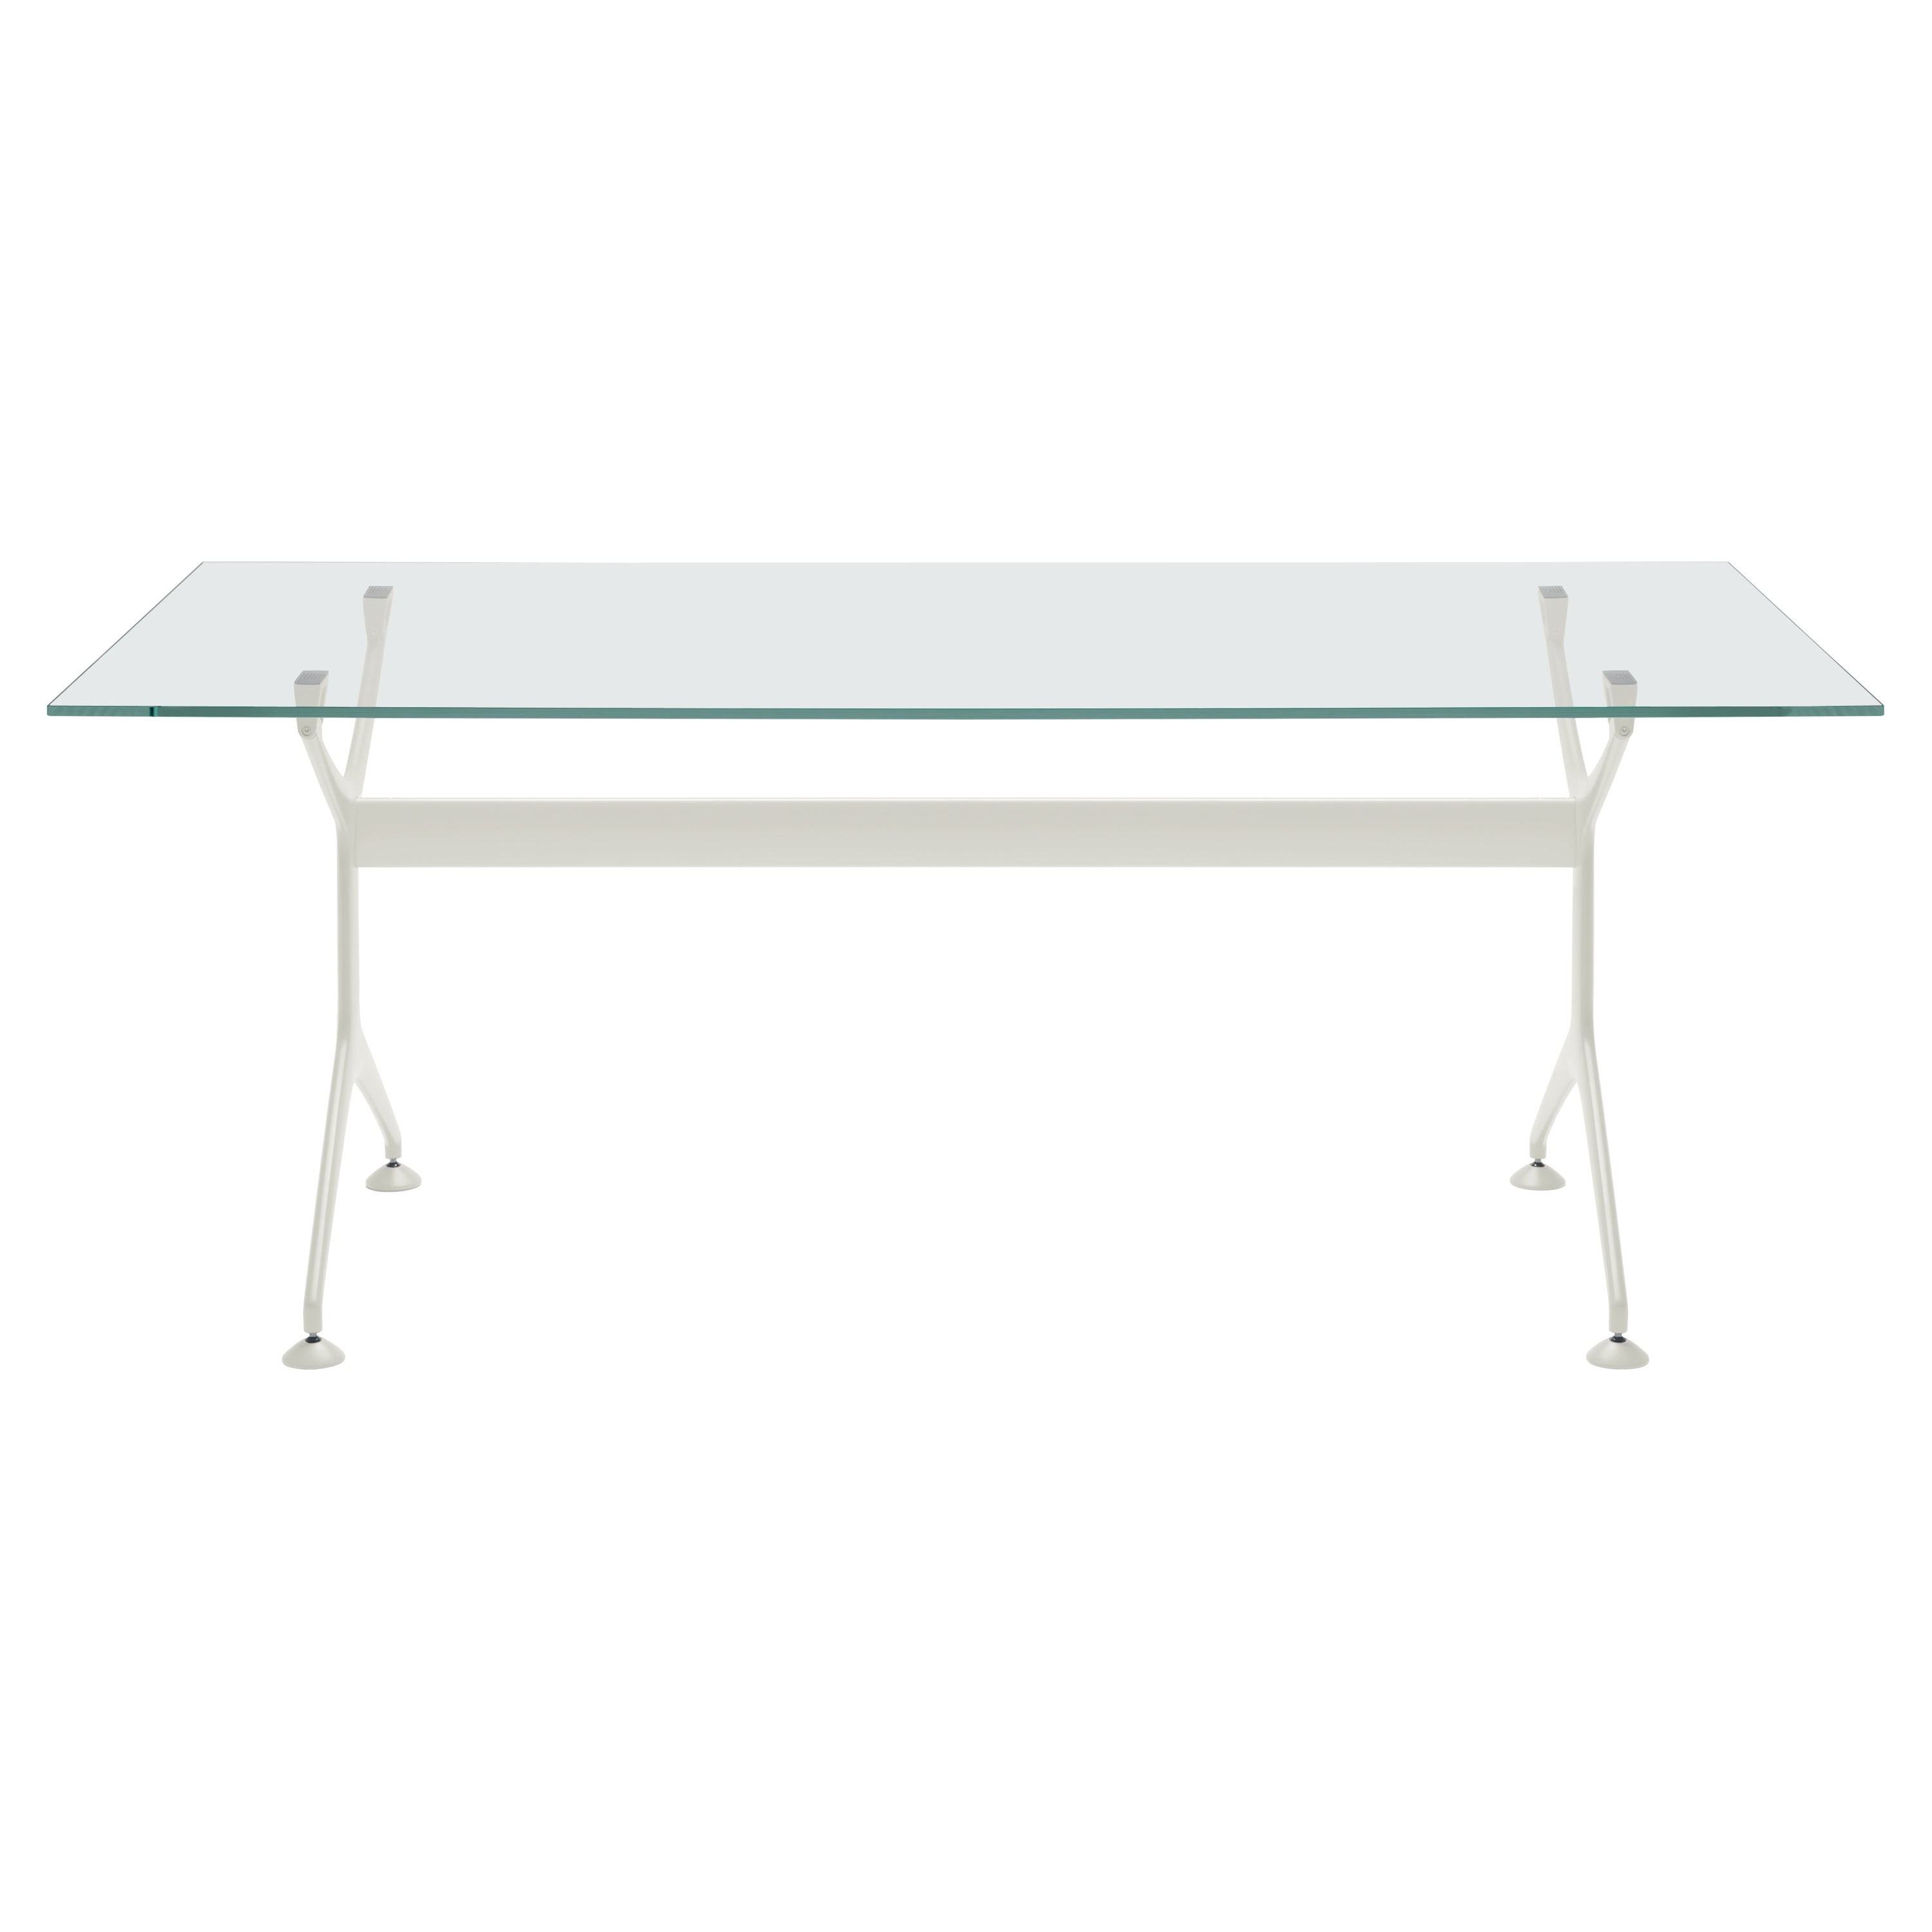 Alias Frametable 190 in Glass Top with White Lacquered Aluminium Frame For Sale